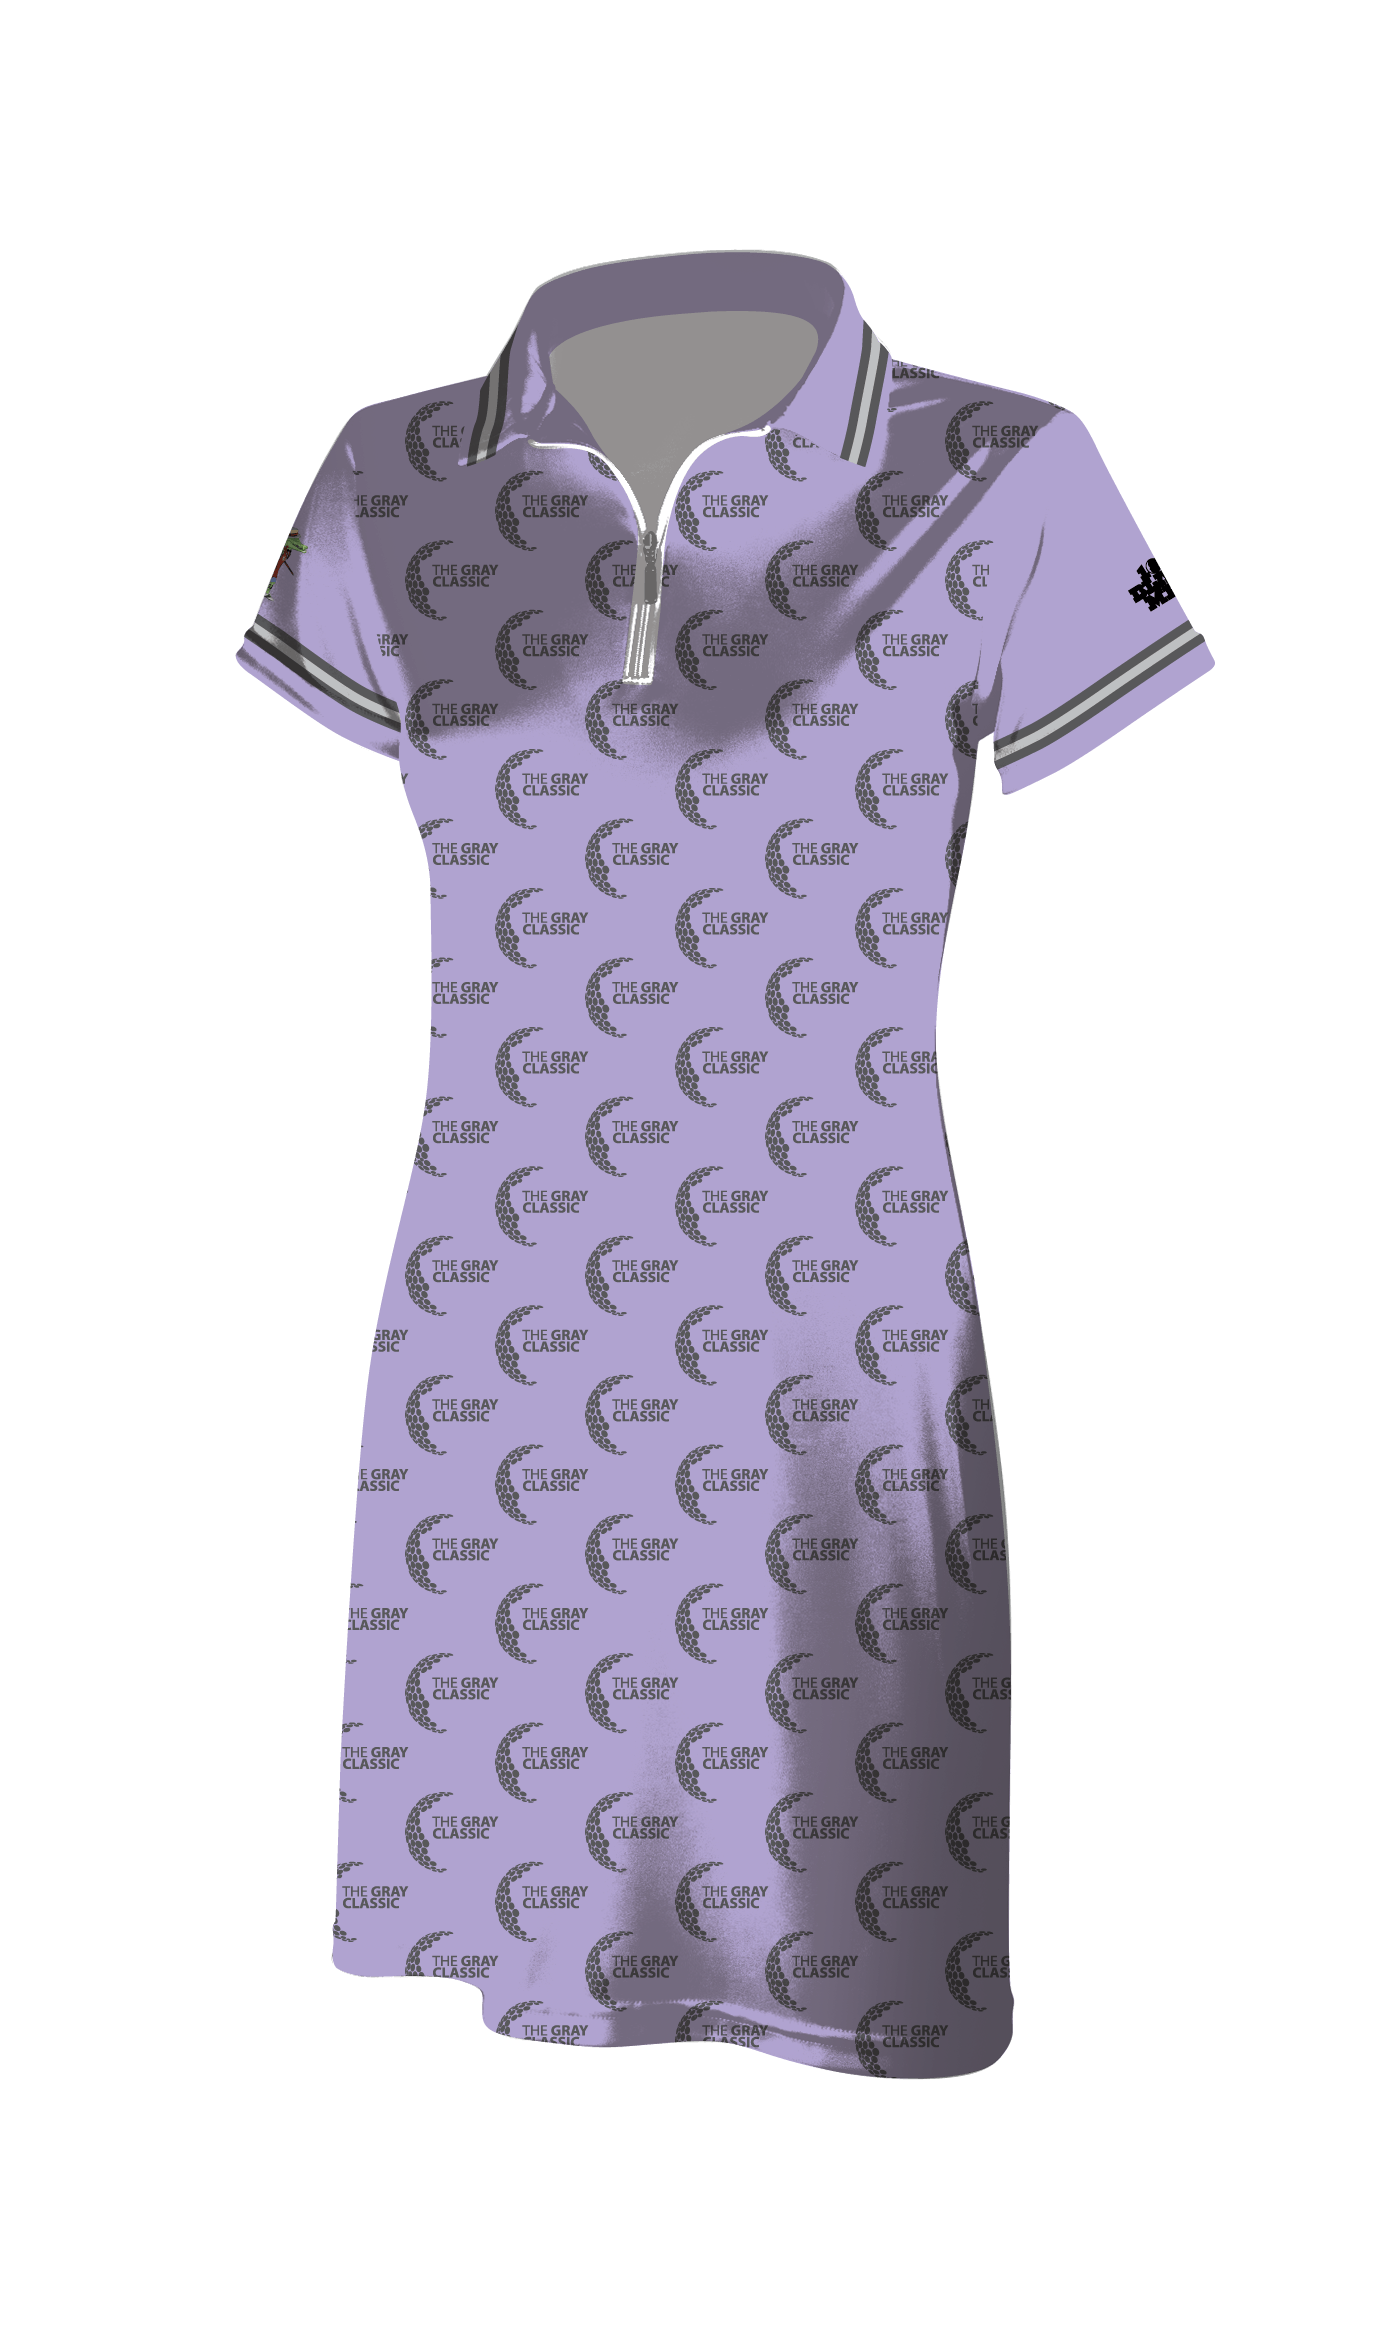 Lavender Polo Logo - Tatted Croc » GRAY CLASSIC LADIES LOGO REPEAT ON LAVENDER POLO DRESS